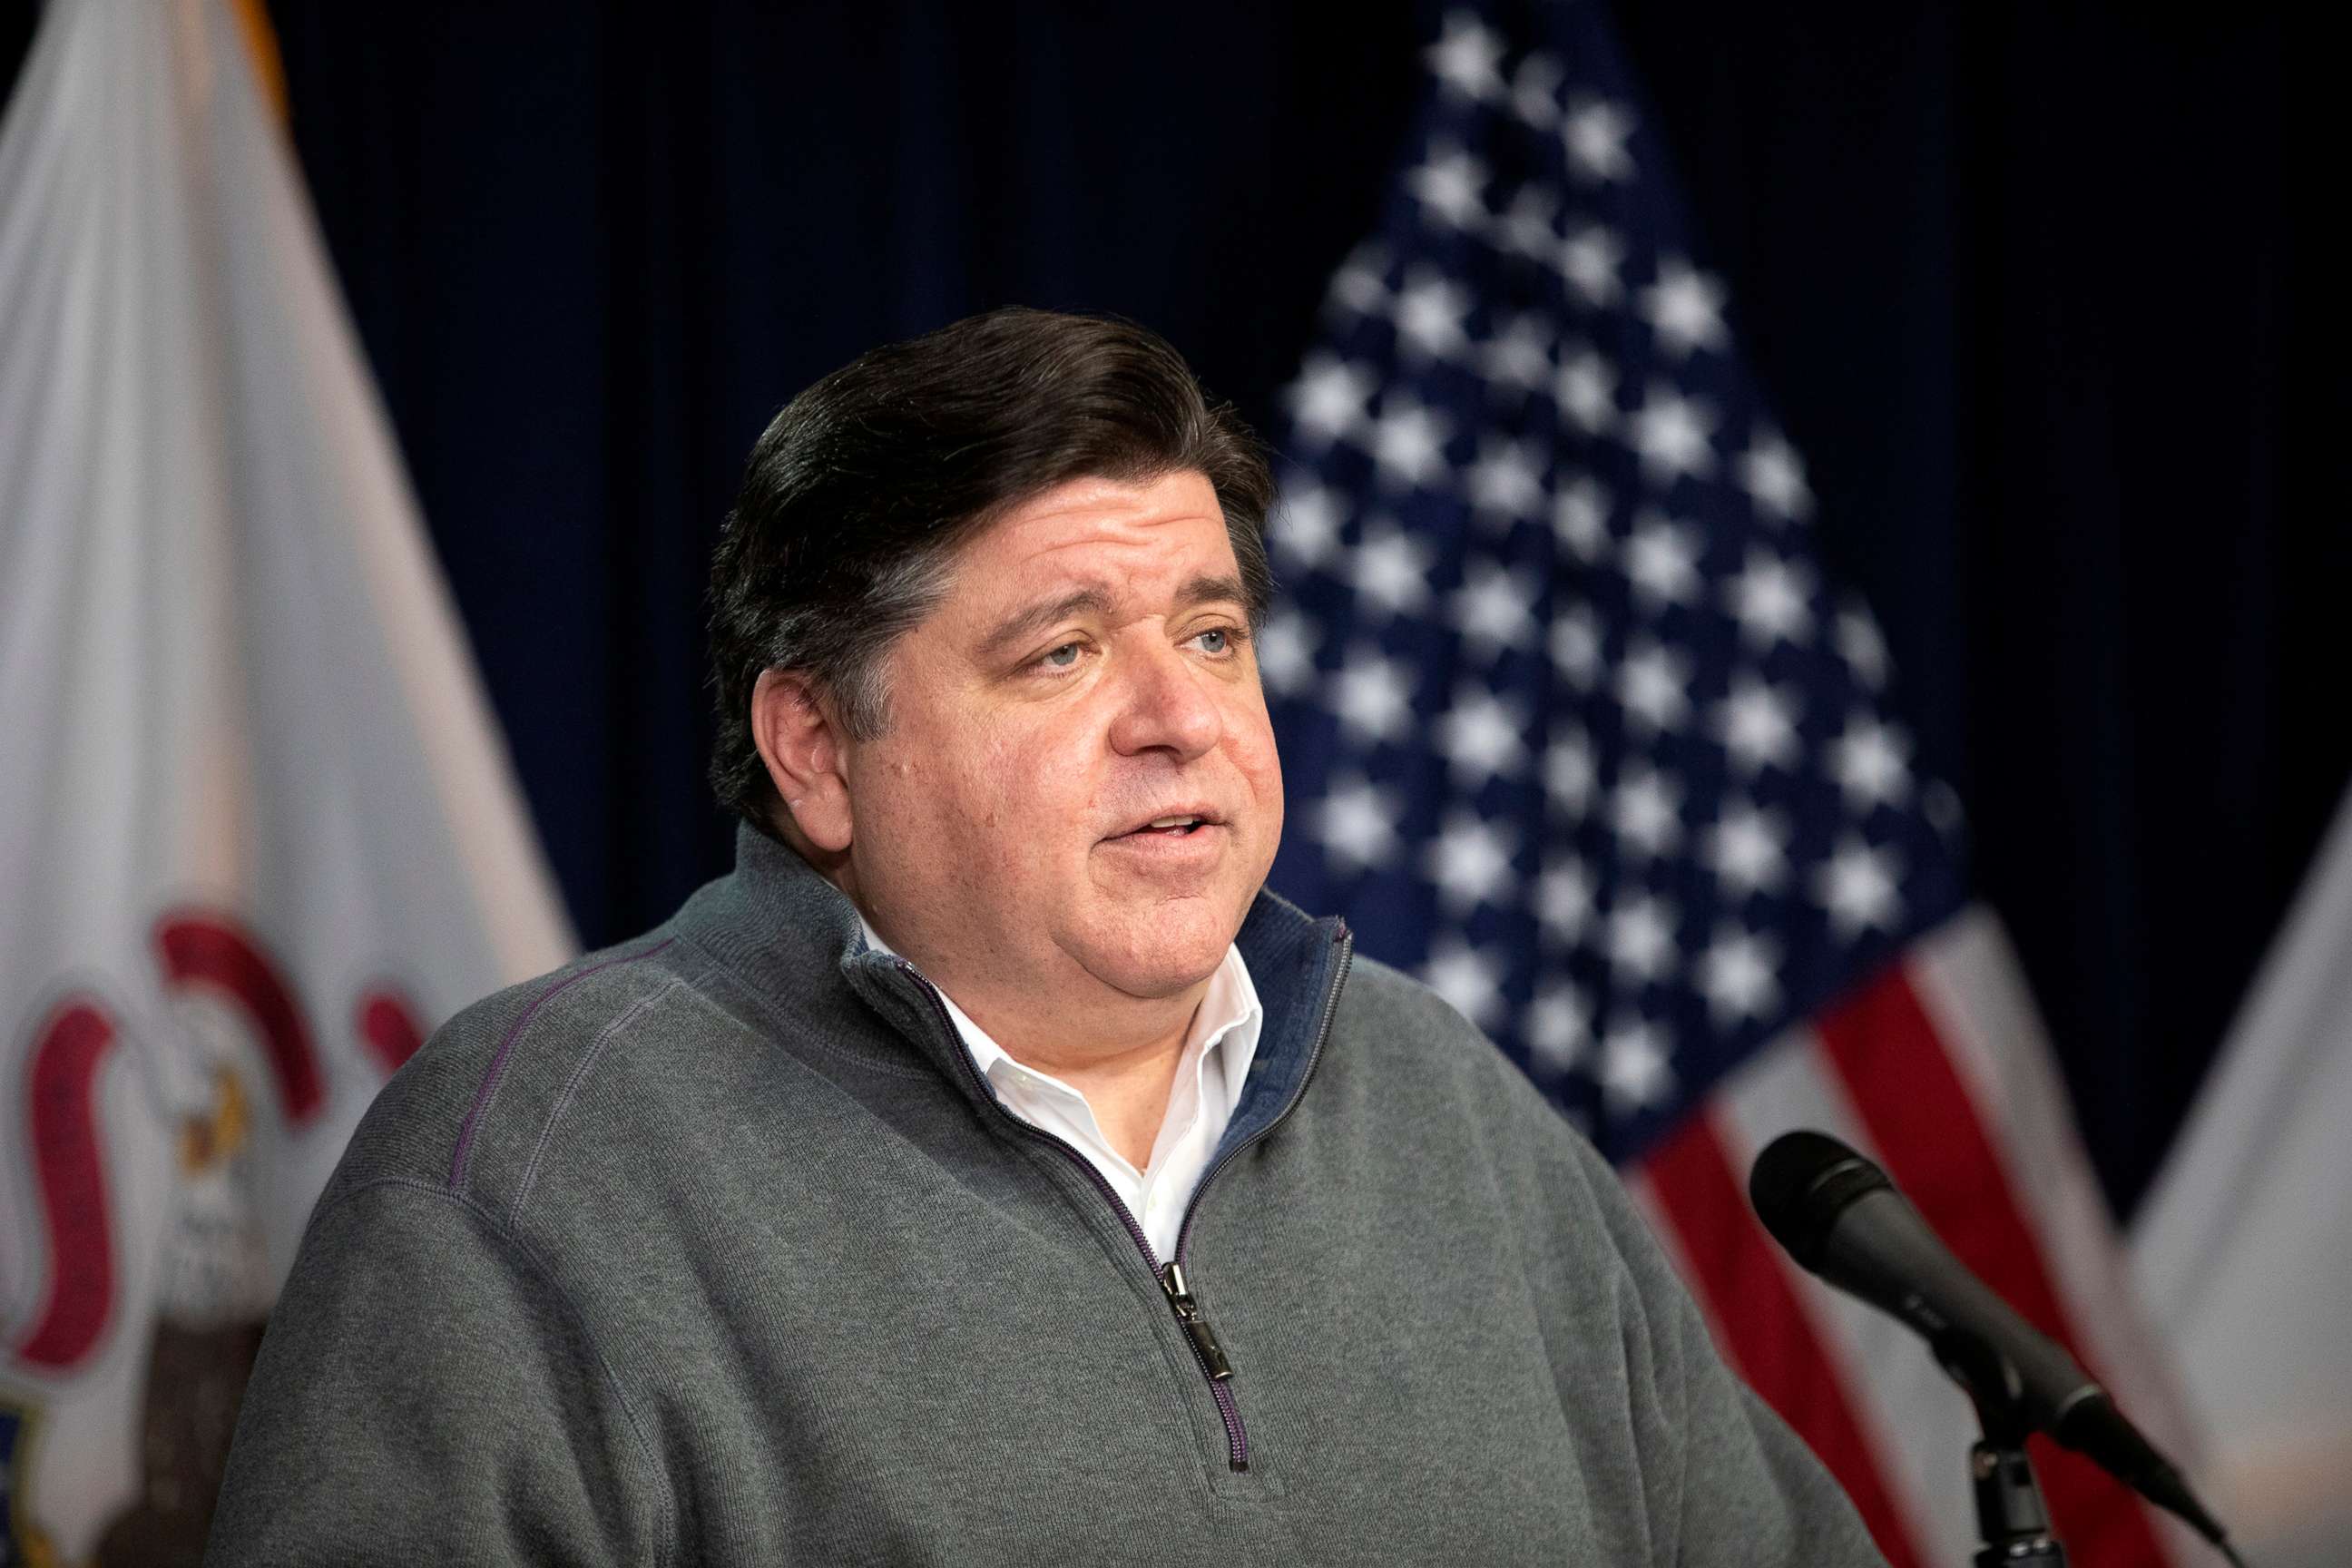 PHOTO: Illinois Gov. J.B. Pritzker speaks during the daily press briefing regarding the coronavirus pandemic, May 3, 2020, at the James R. Thompson Center in Chicago.